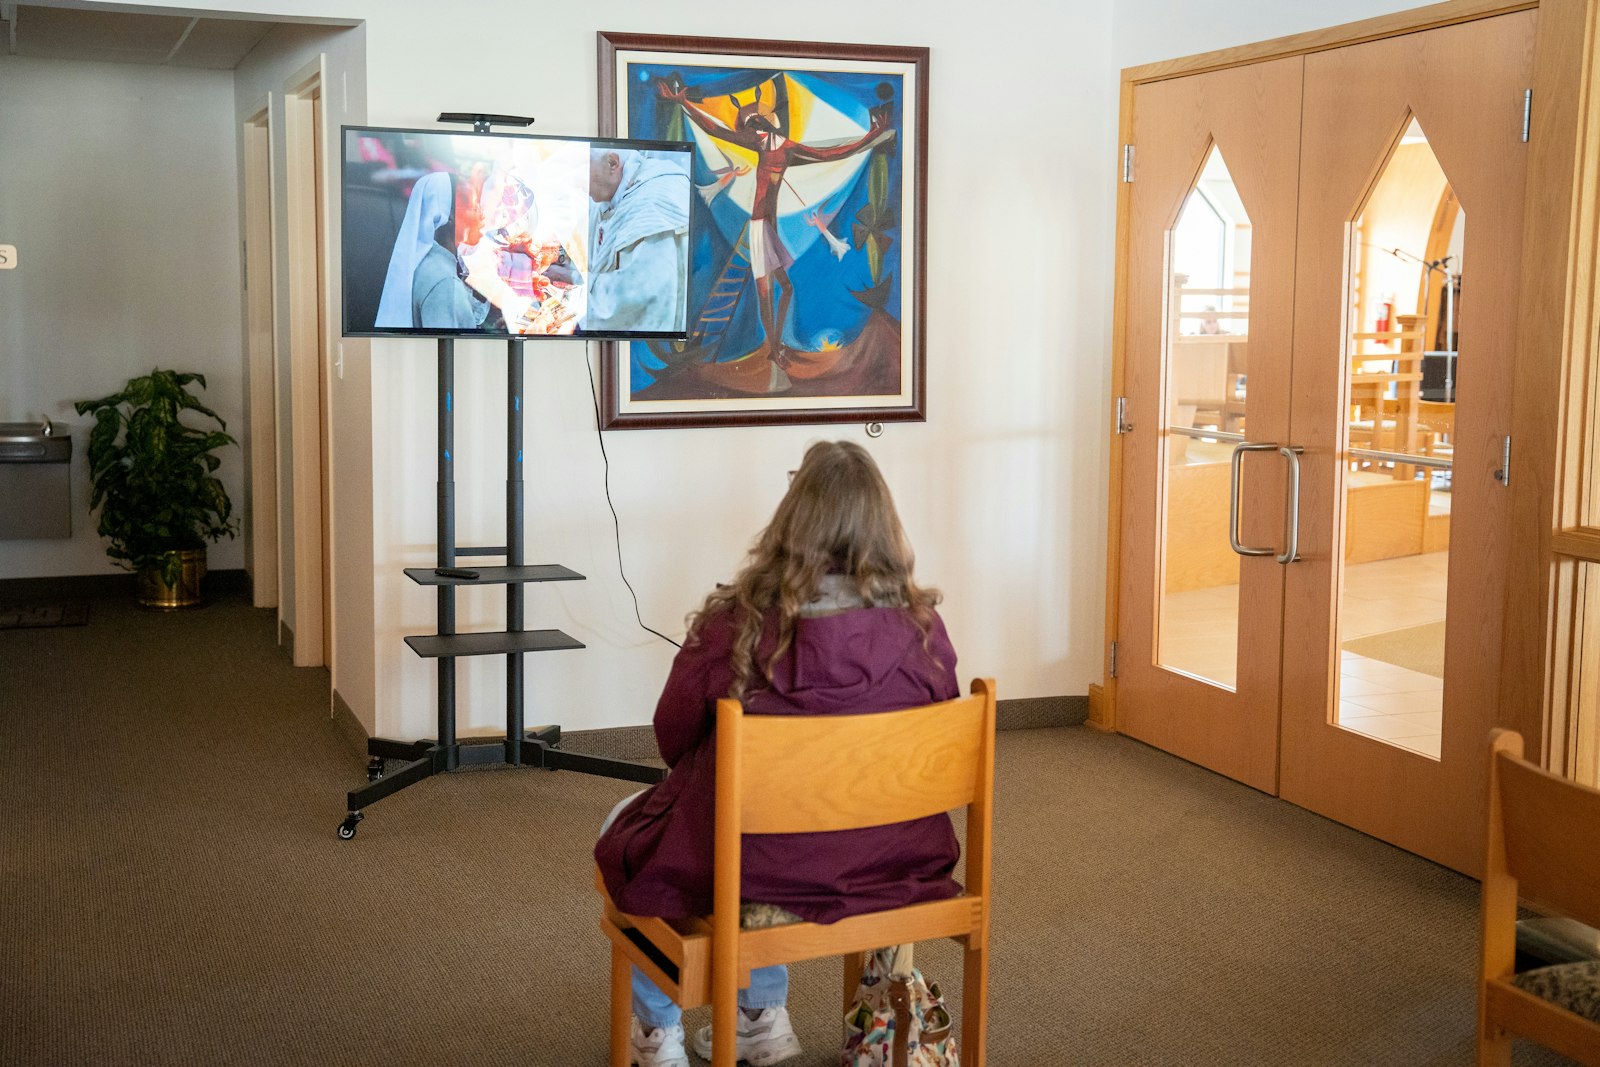 A woman watches a video that accompanies the Eucharistic miracles exhibit at St. Roch Parish in Flat Rock. Eucharistic miracles have occurred throughout the Church's history, powerful reminders of God's supernatural presence in each and every Mass.